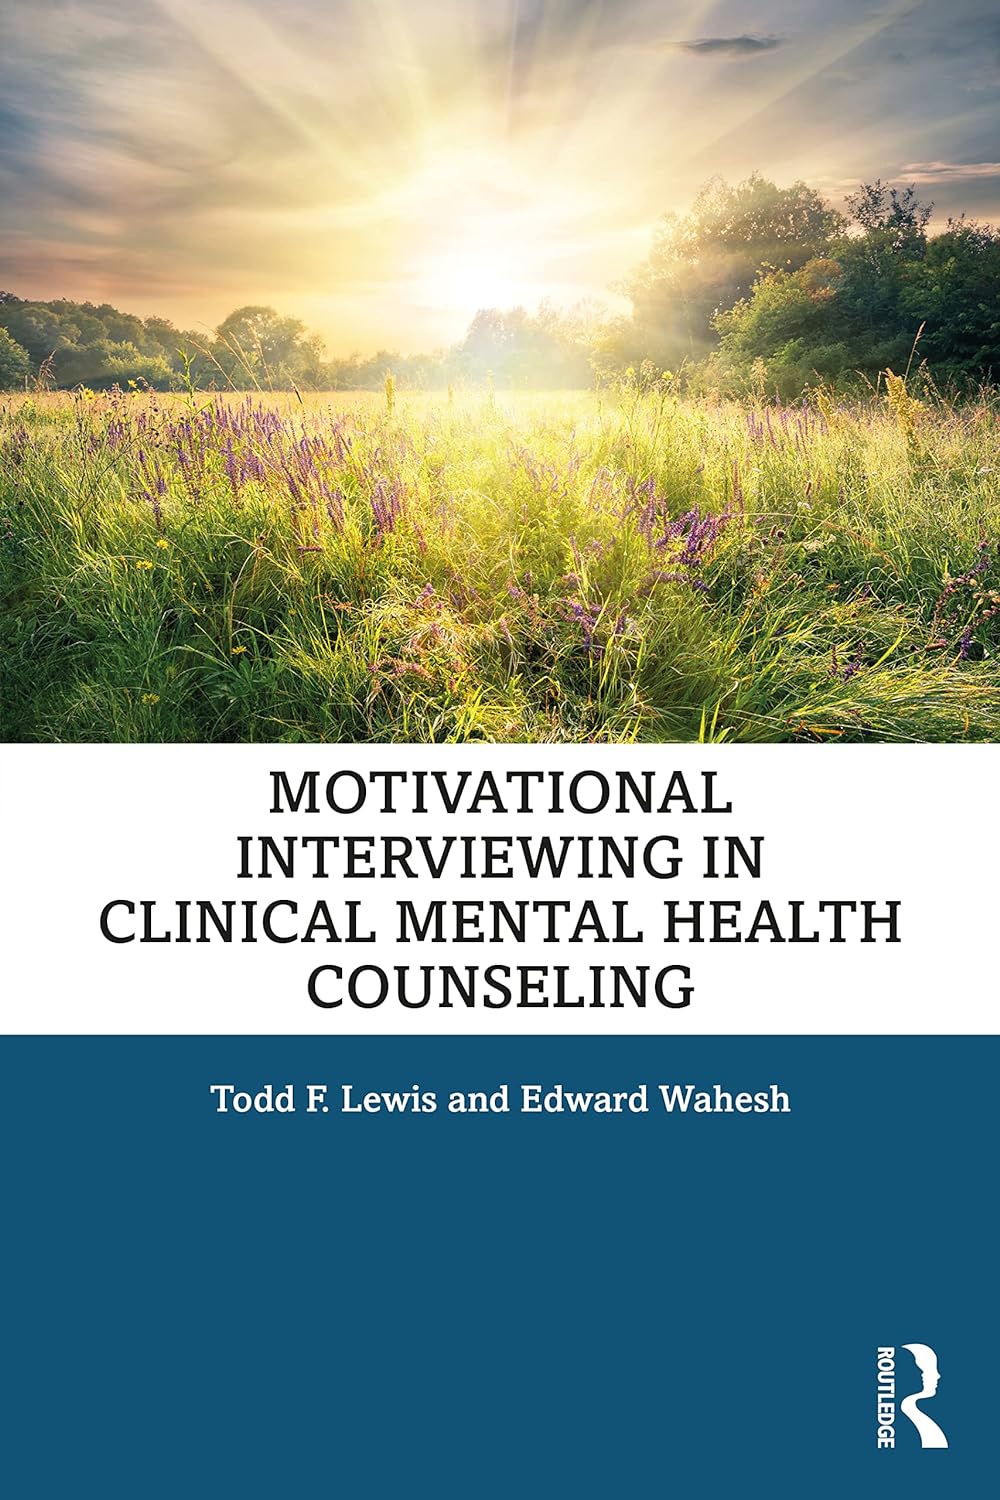 Motivational Interviewing in Clinical Mental Health Counseling  by Todd F. Lewis